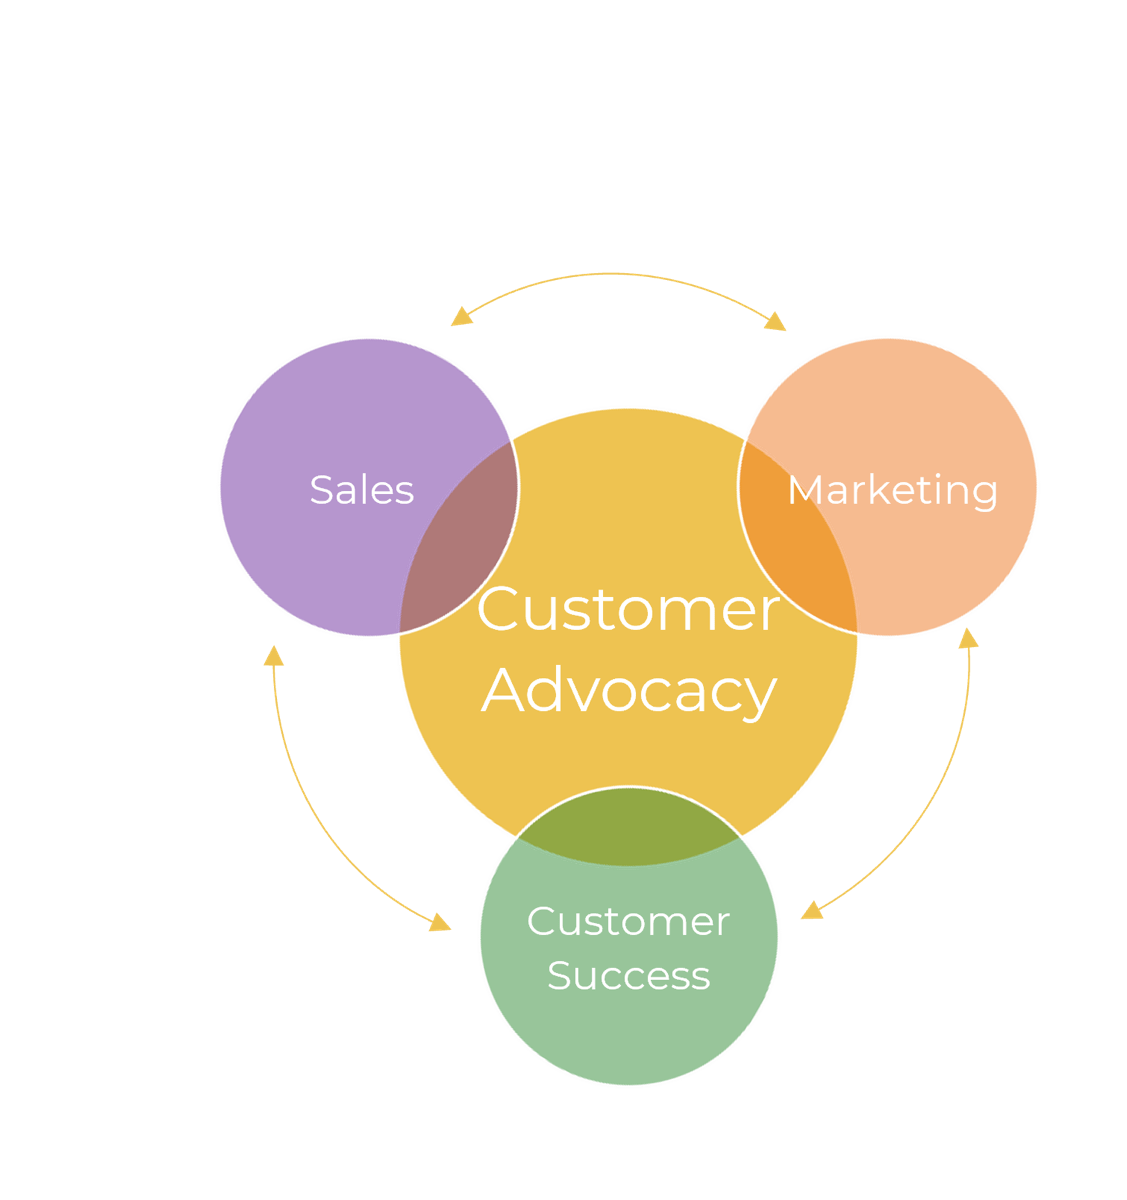 The image contains a picture to demonstrate the cycle of customer advocacy. The image has four circles, with one big circle in the middle and three circles surrounding with arrows pointing in both directions in between them. The middle circle is labelled customer advocacy. The three circles are labelled: sales, customer success, marketing. 